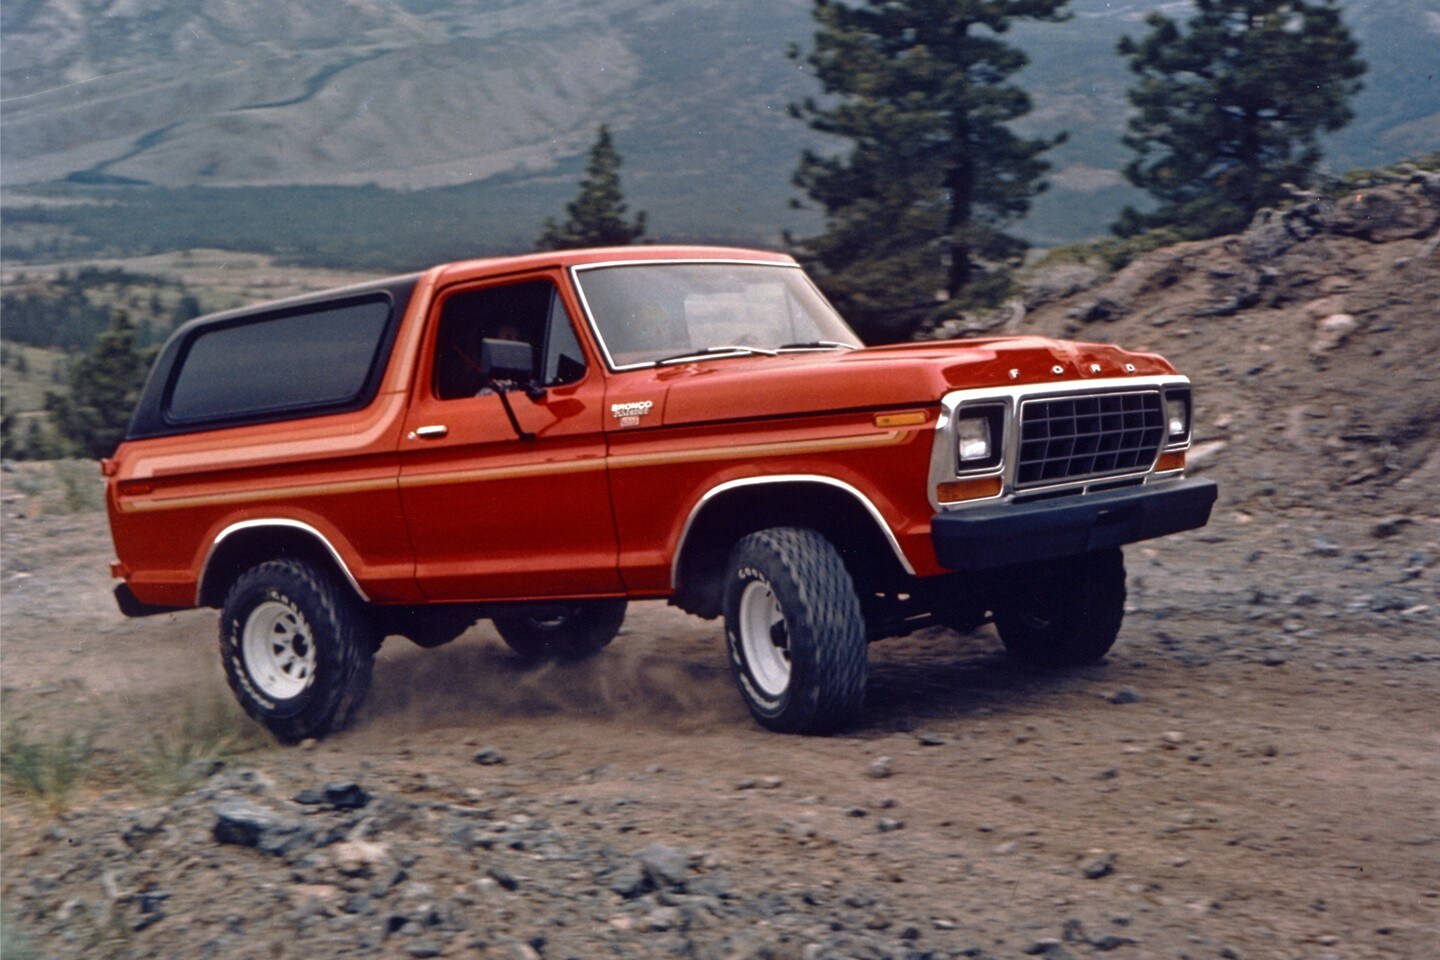  Ford Bronco 1978 en Candyapple Red con Paquete Free Wheeling